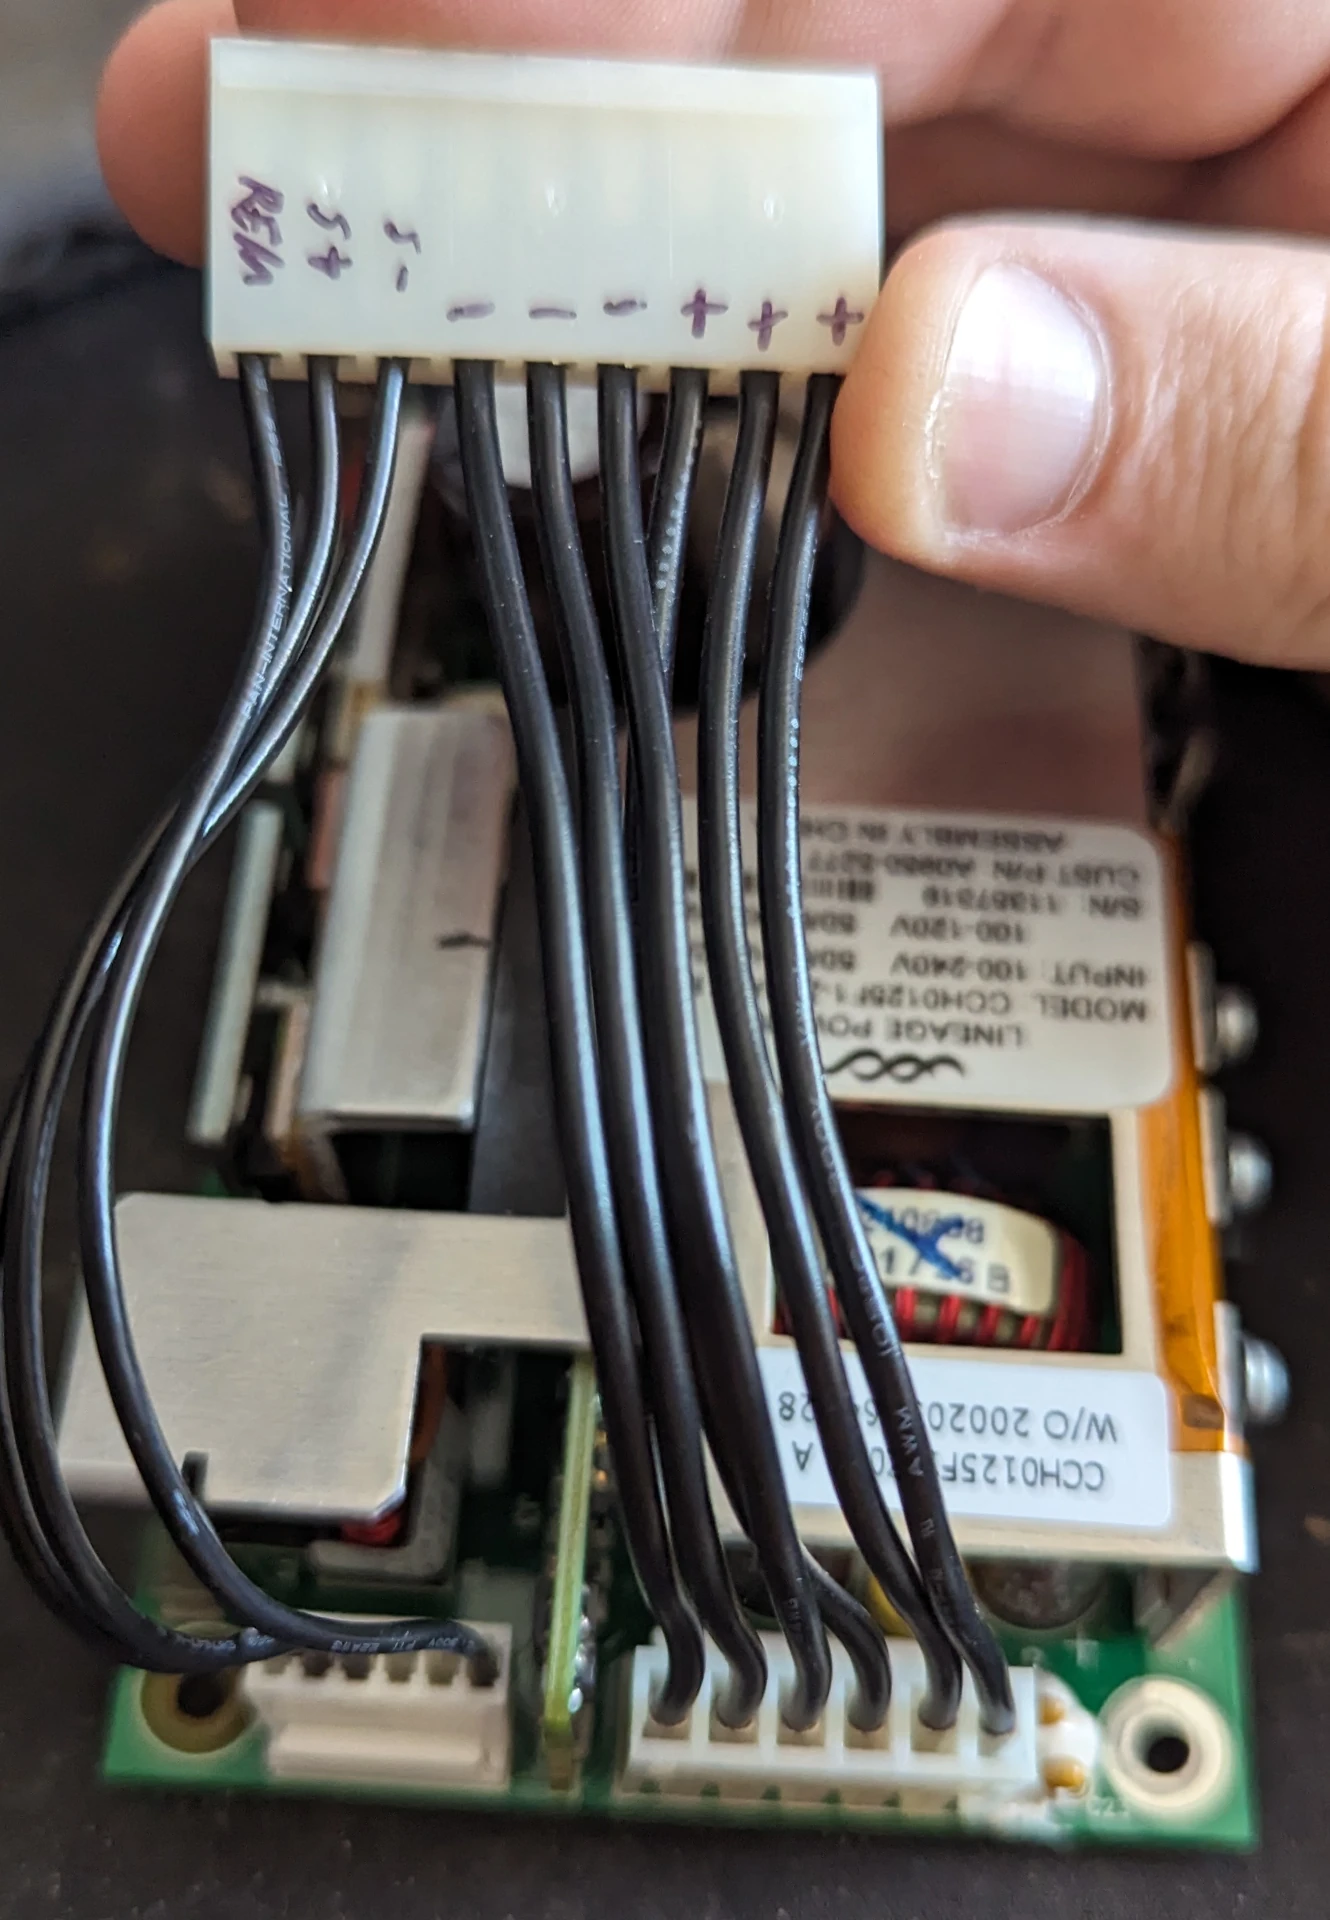 Old PSU showing connector pinout